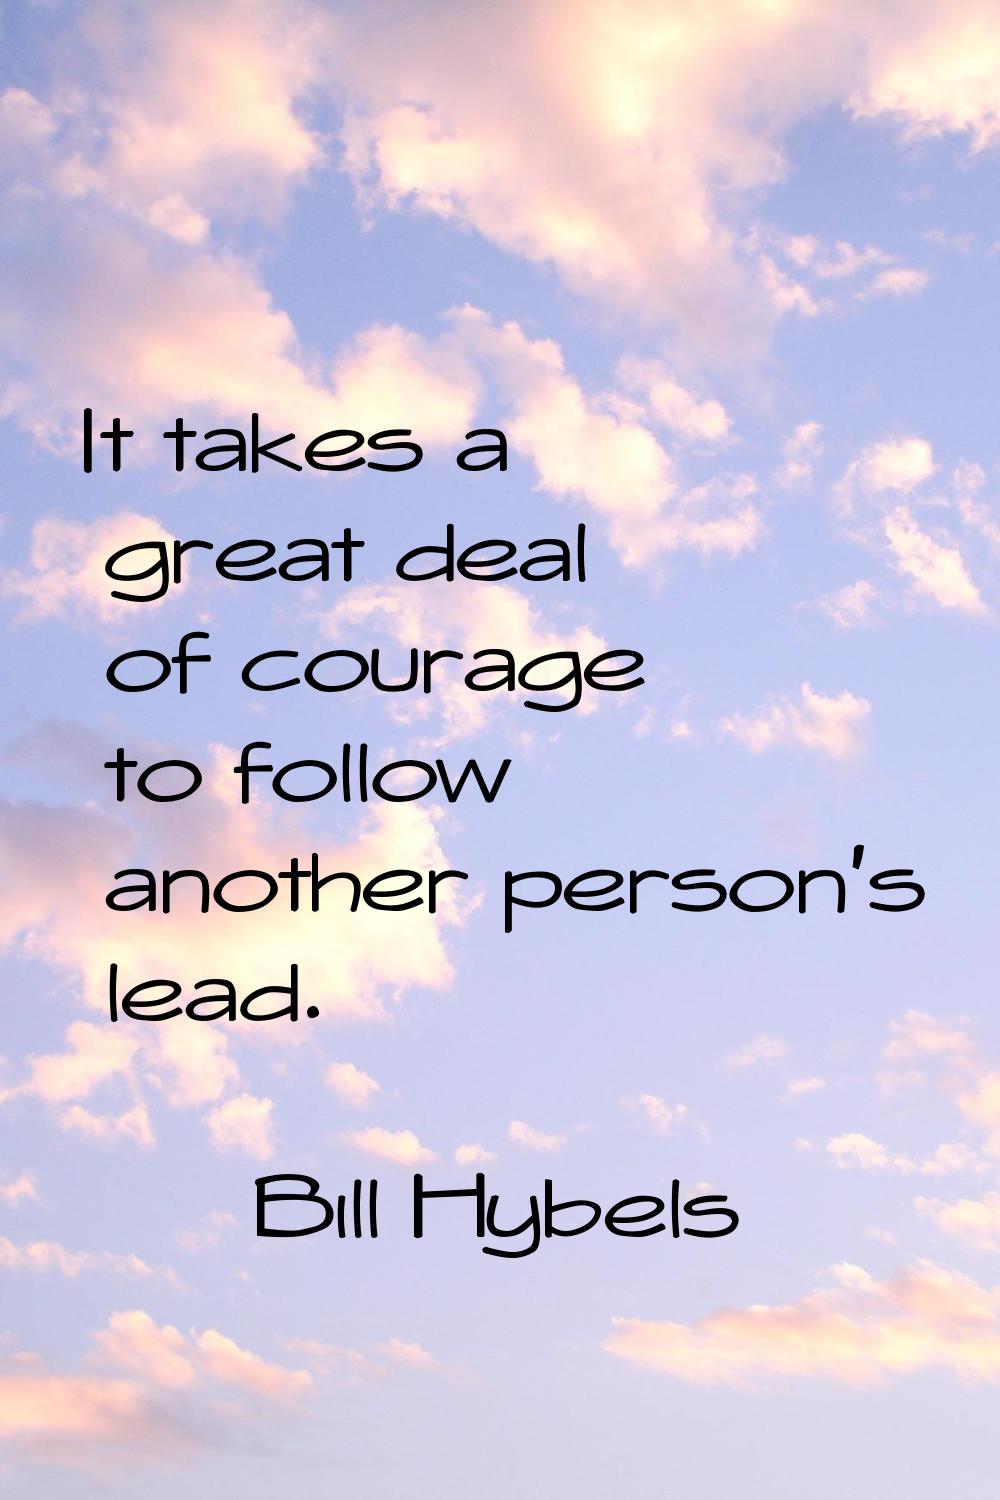 It takes a great deal of courage to follow another person's lead.